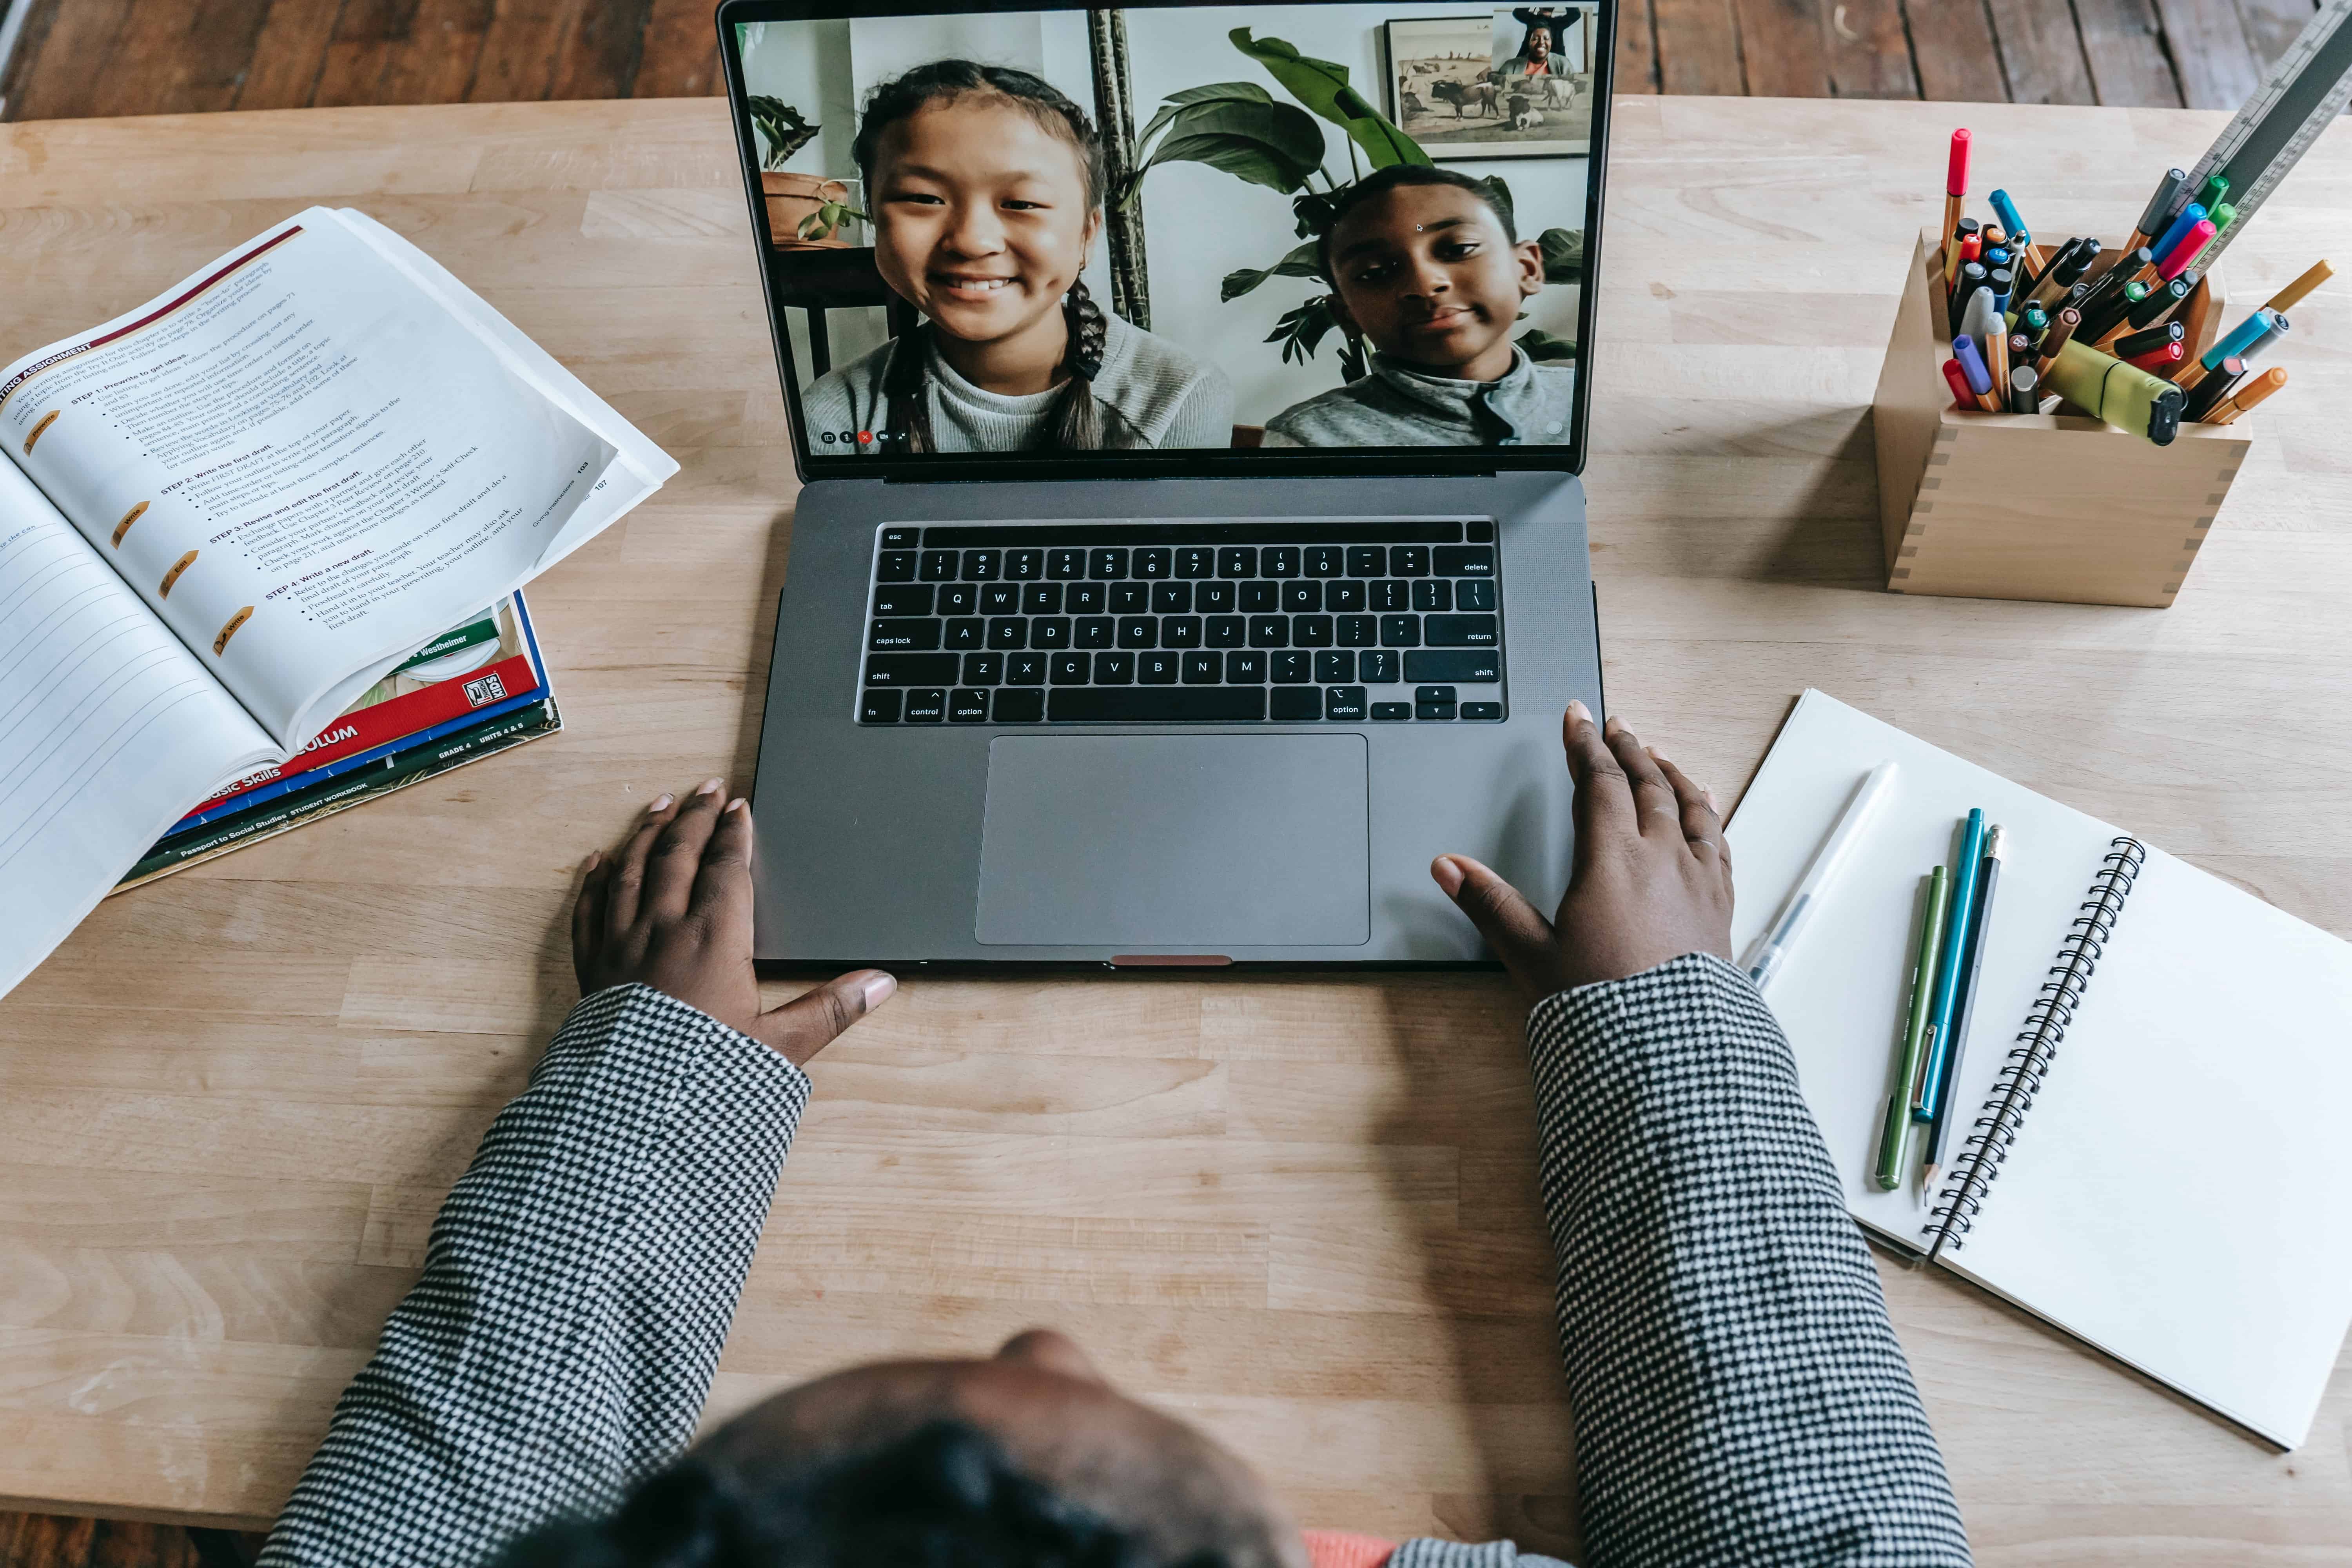 Adapting the Education System to Remote Learning